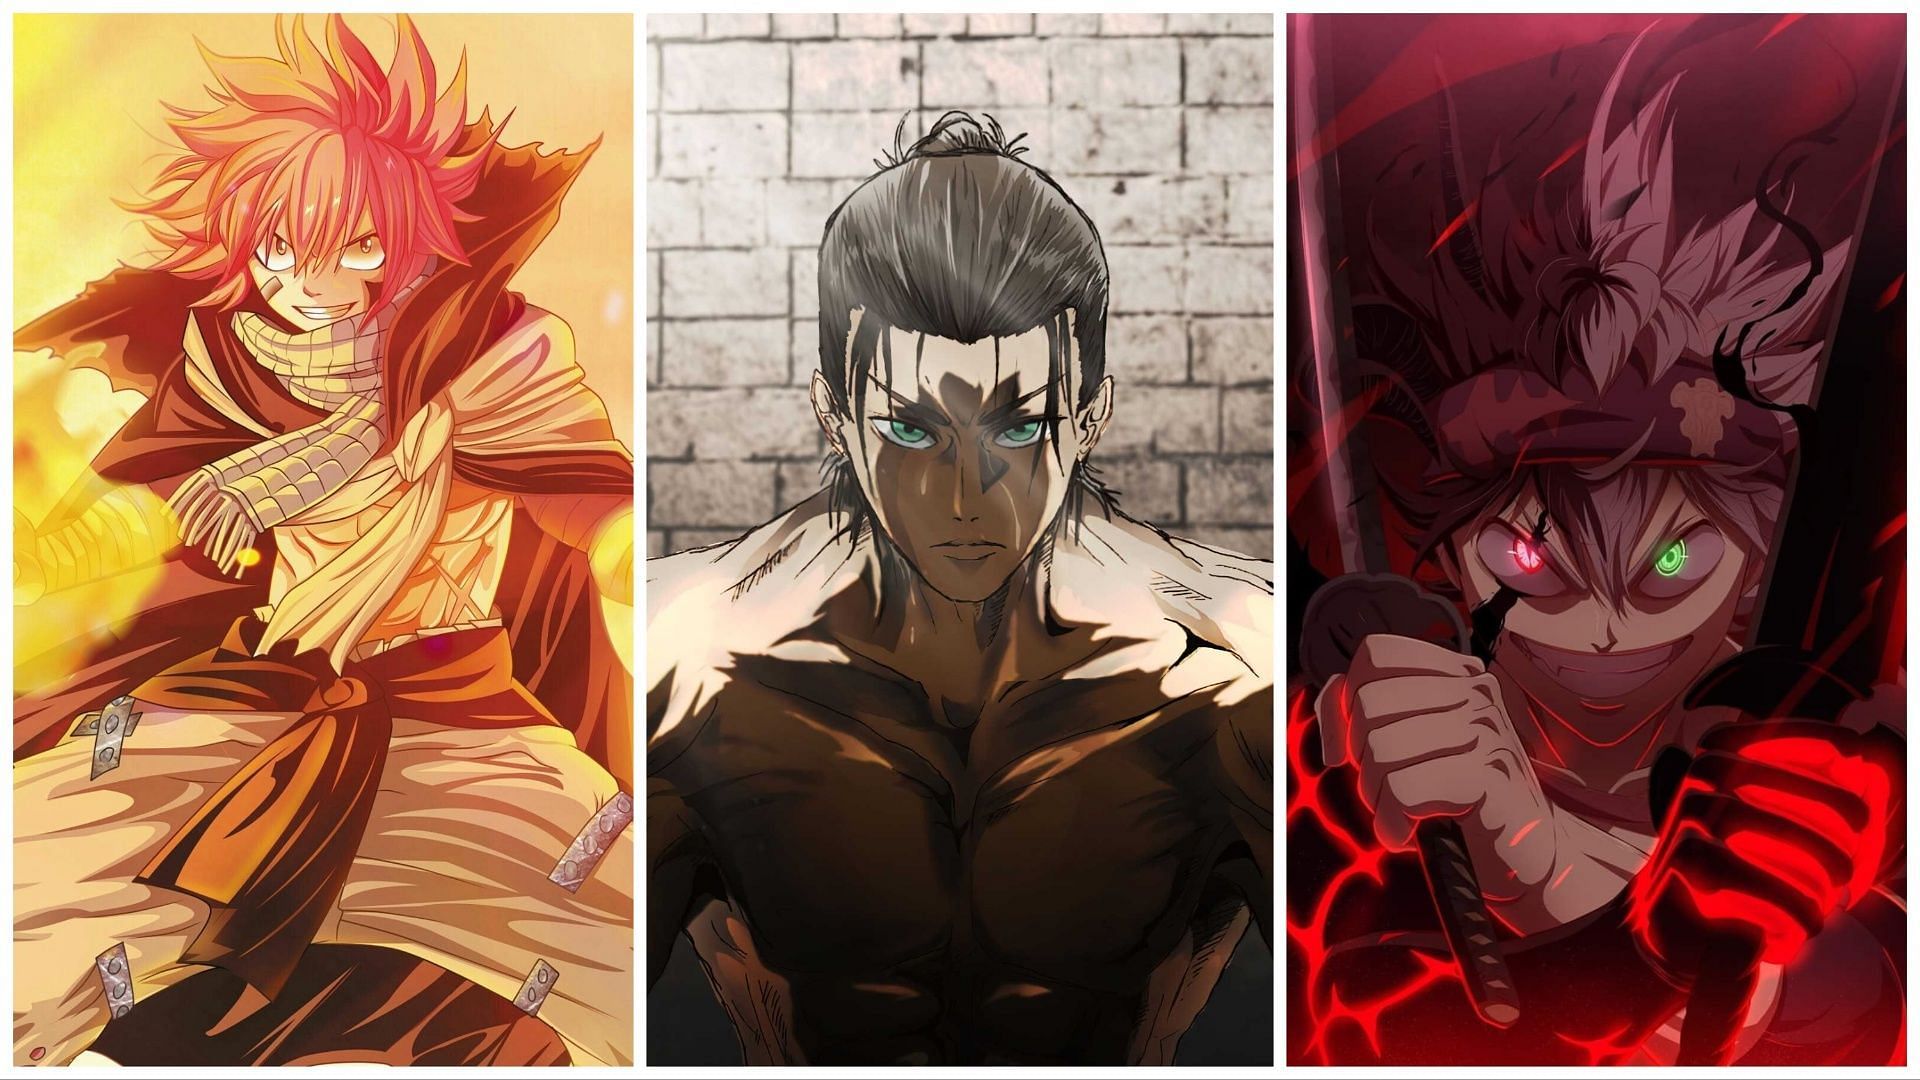 50 Legendary Strongest Anime Characters - ReignOfReads